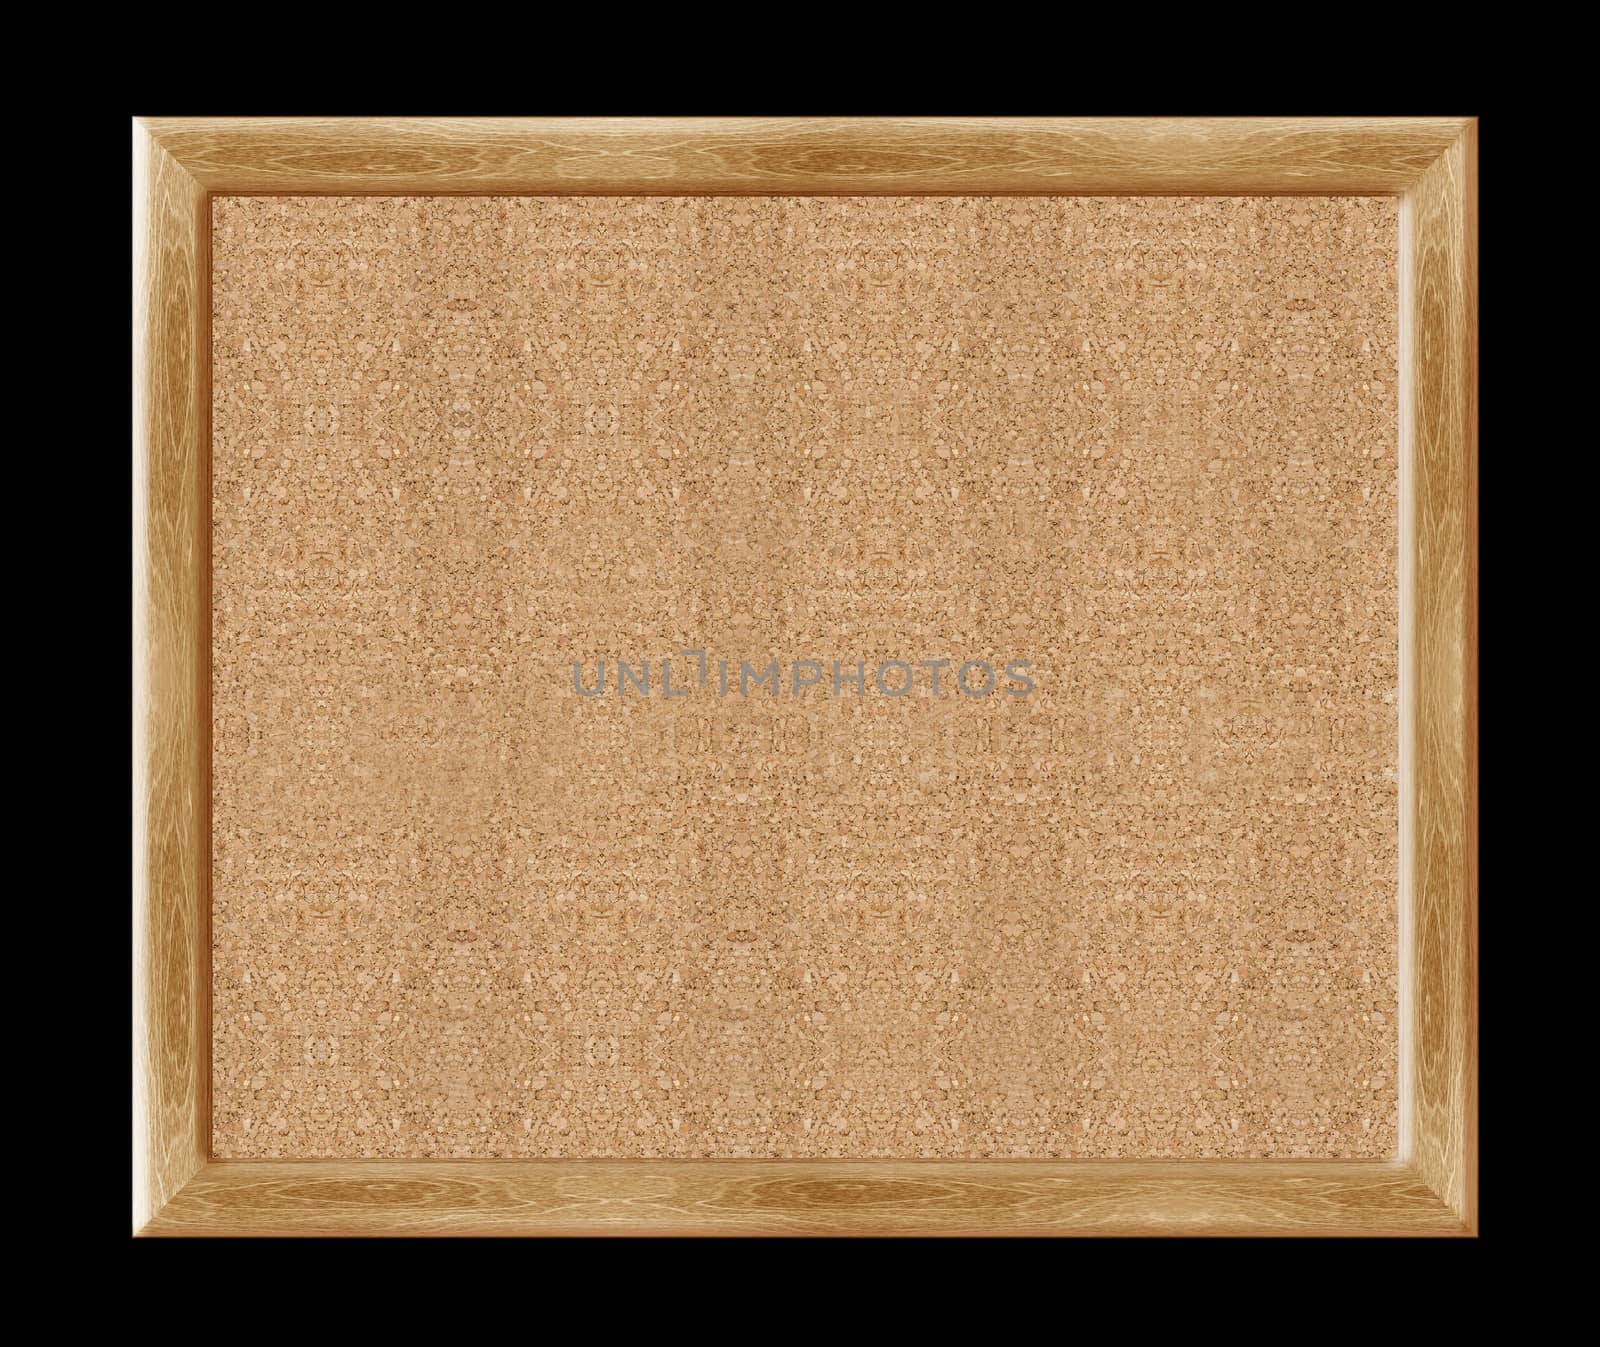 Blank Cork board with wooden frame (with clipping work path)